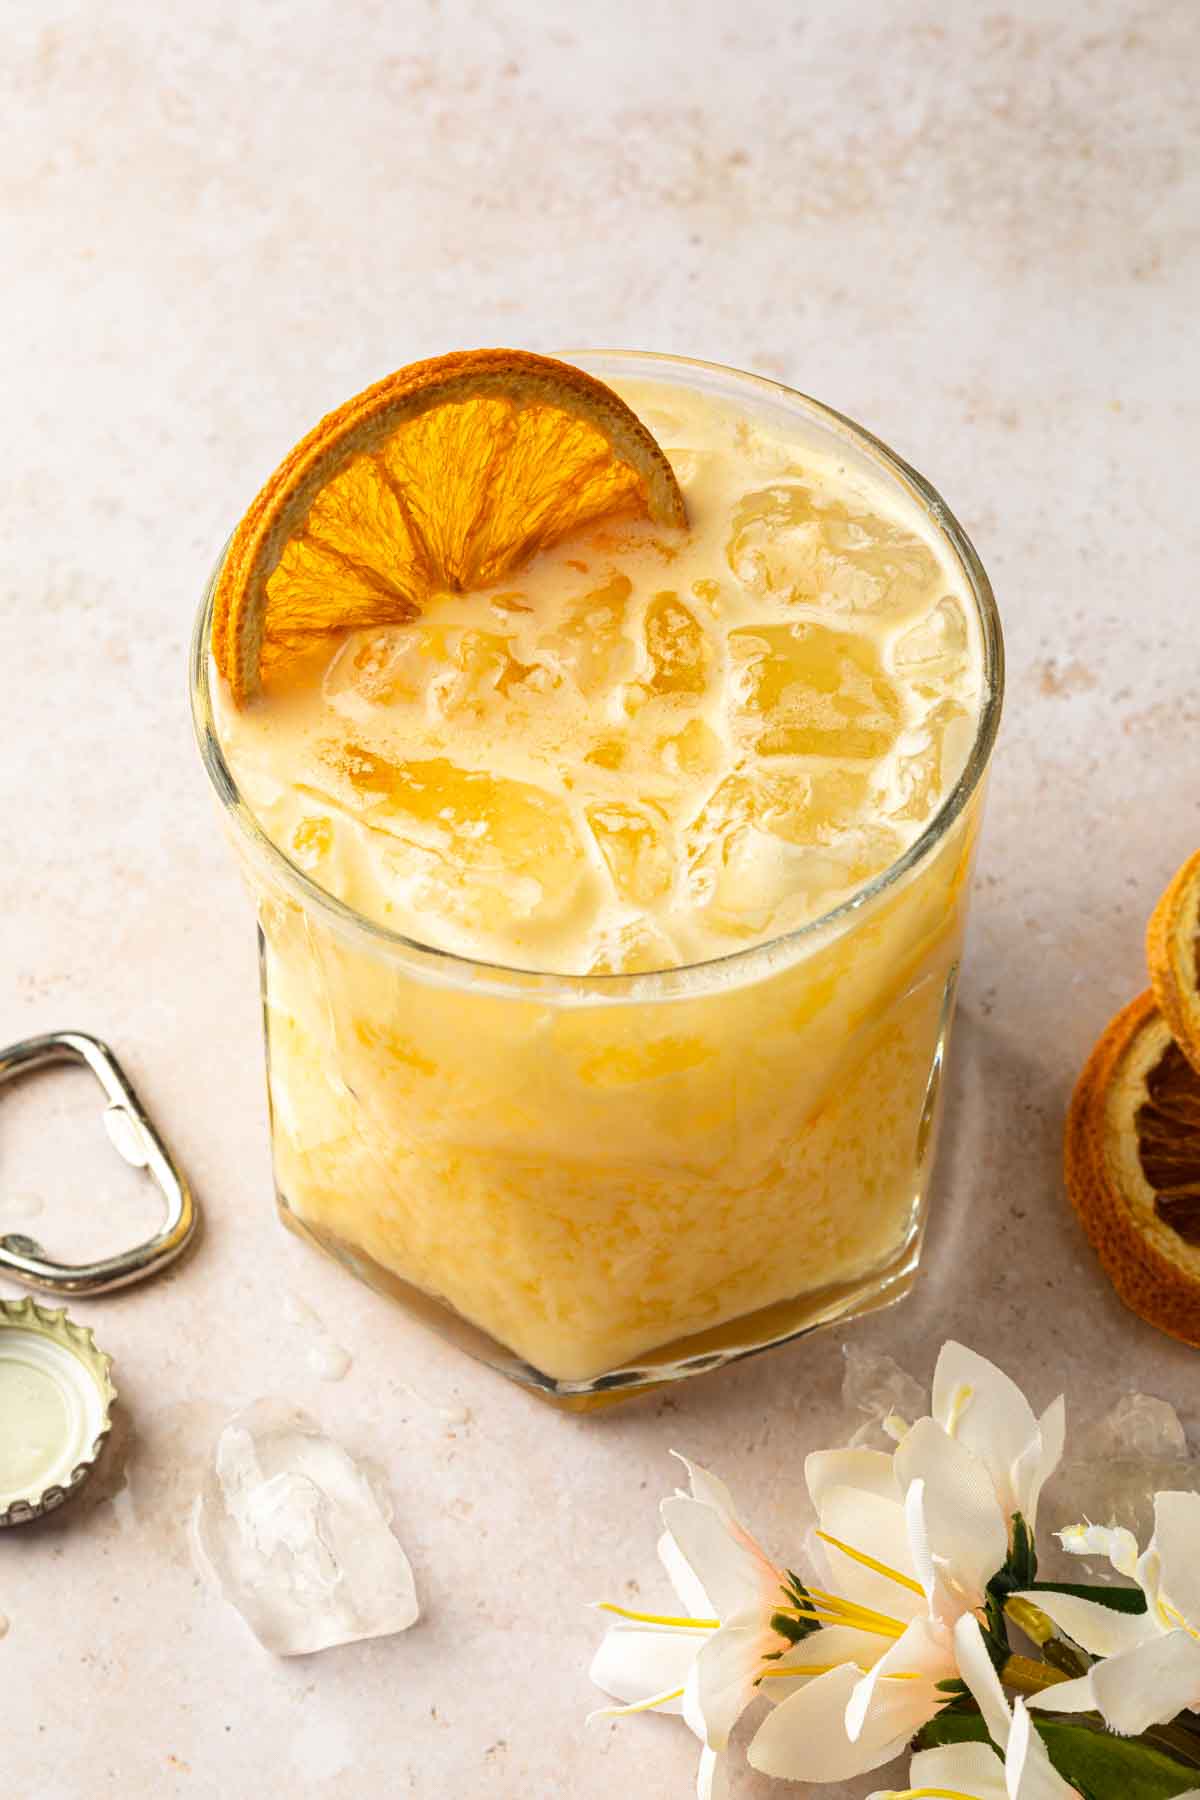 A creamy orange drink made with passion fruit syrup, garnished with a dried orange wheel. 